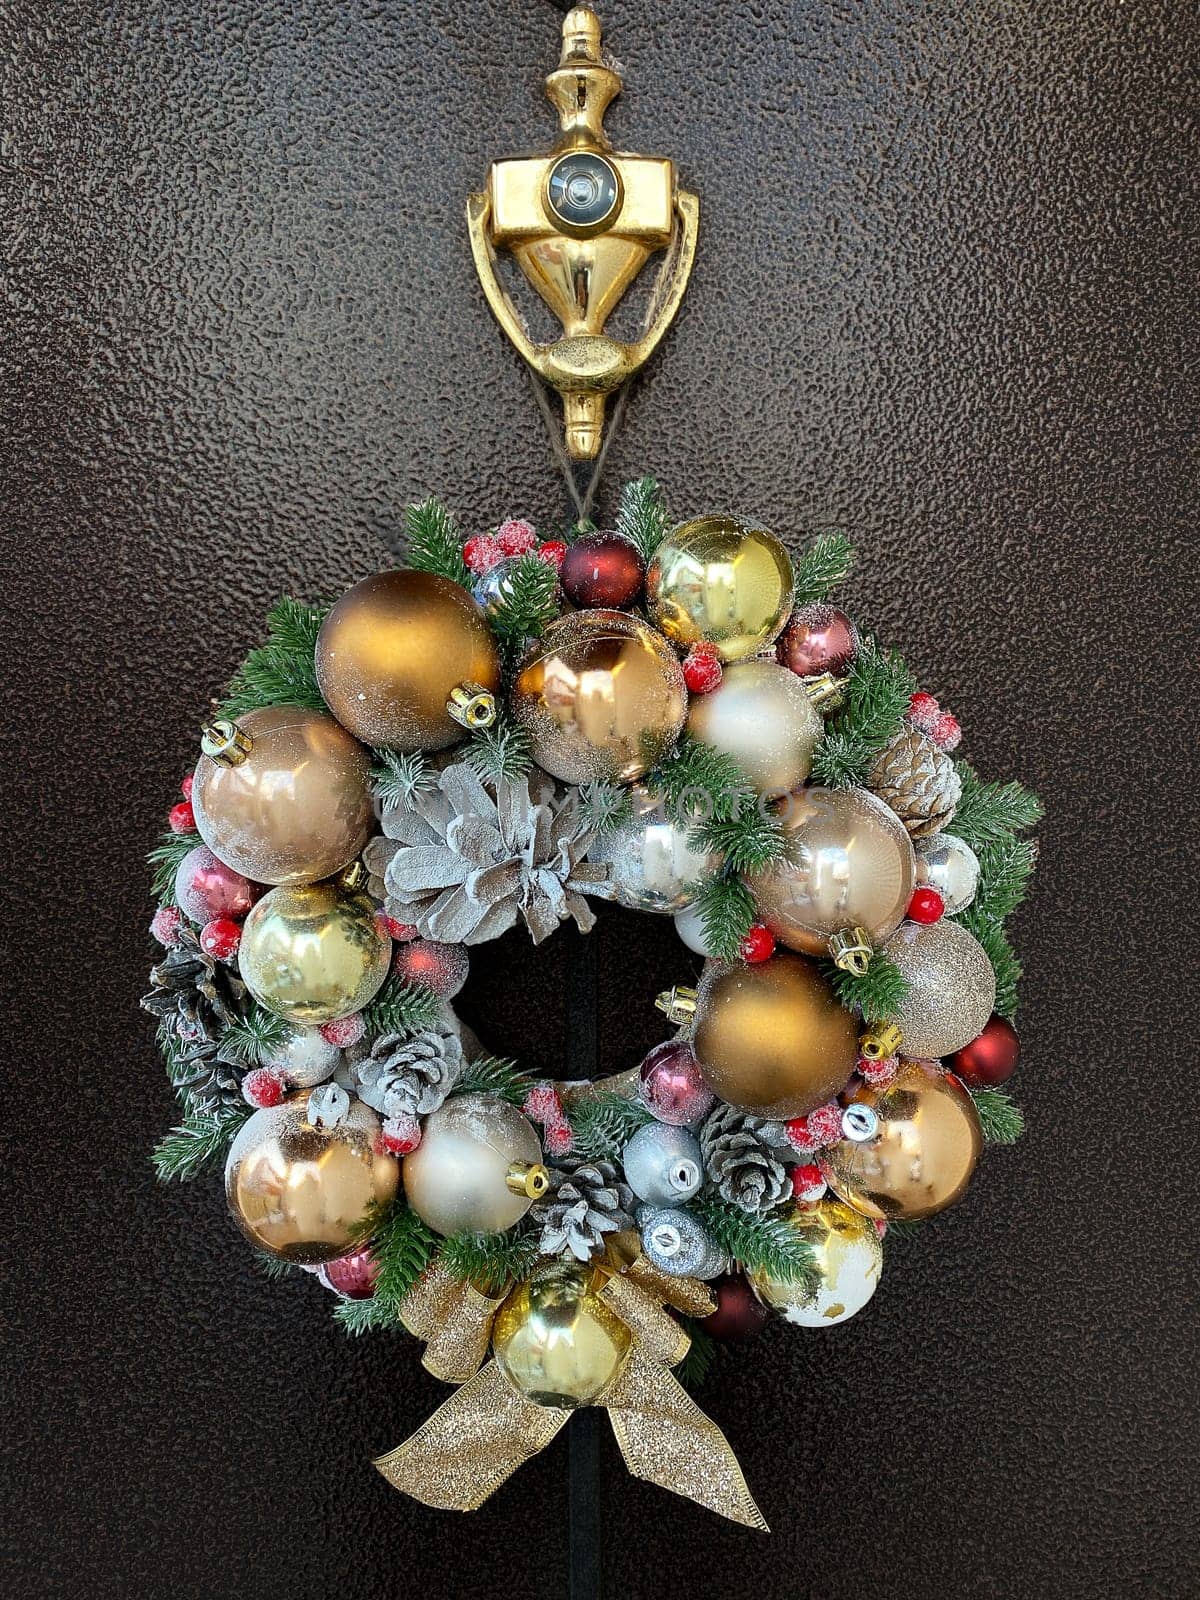 Luxurious Christmas decorative wreath, handmade with pine cones and golden balls, hangs on the front door of the house. by Proxima13